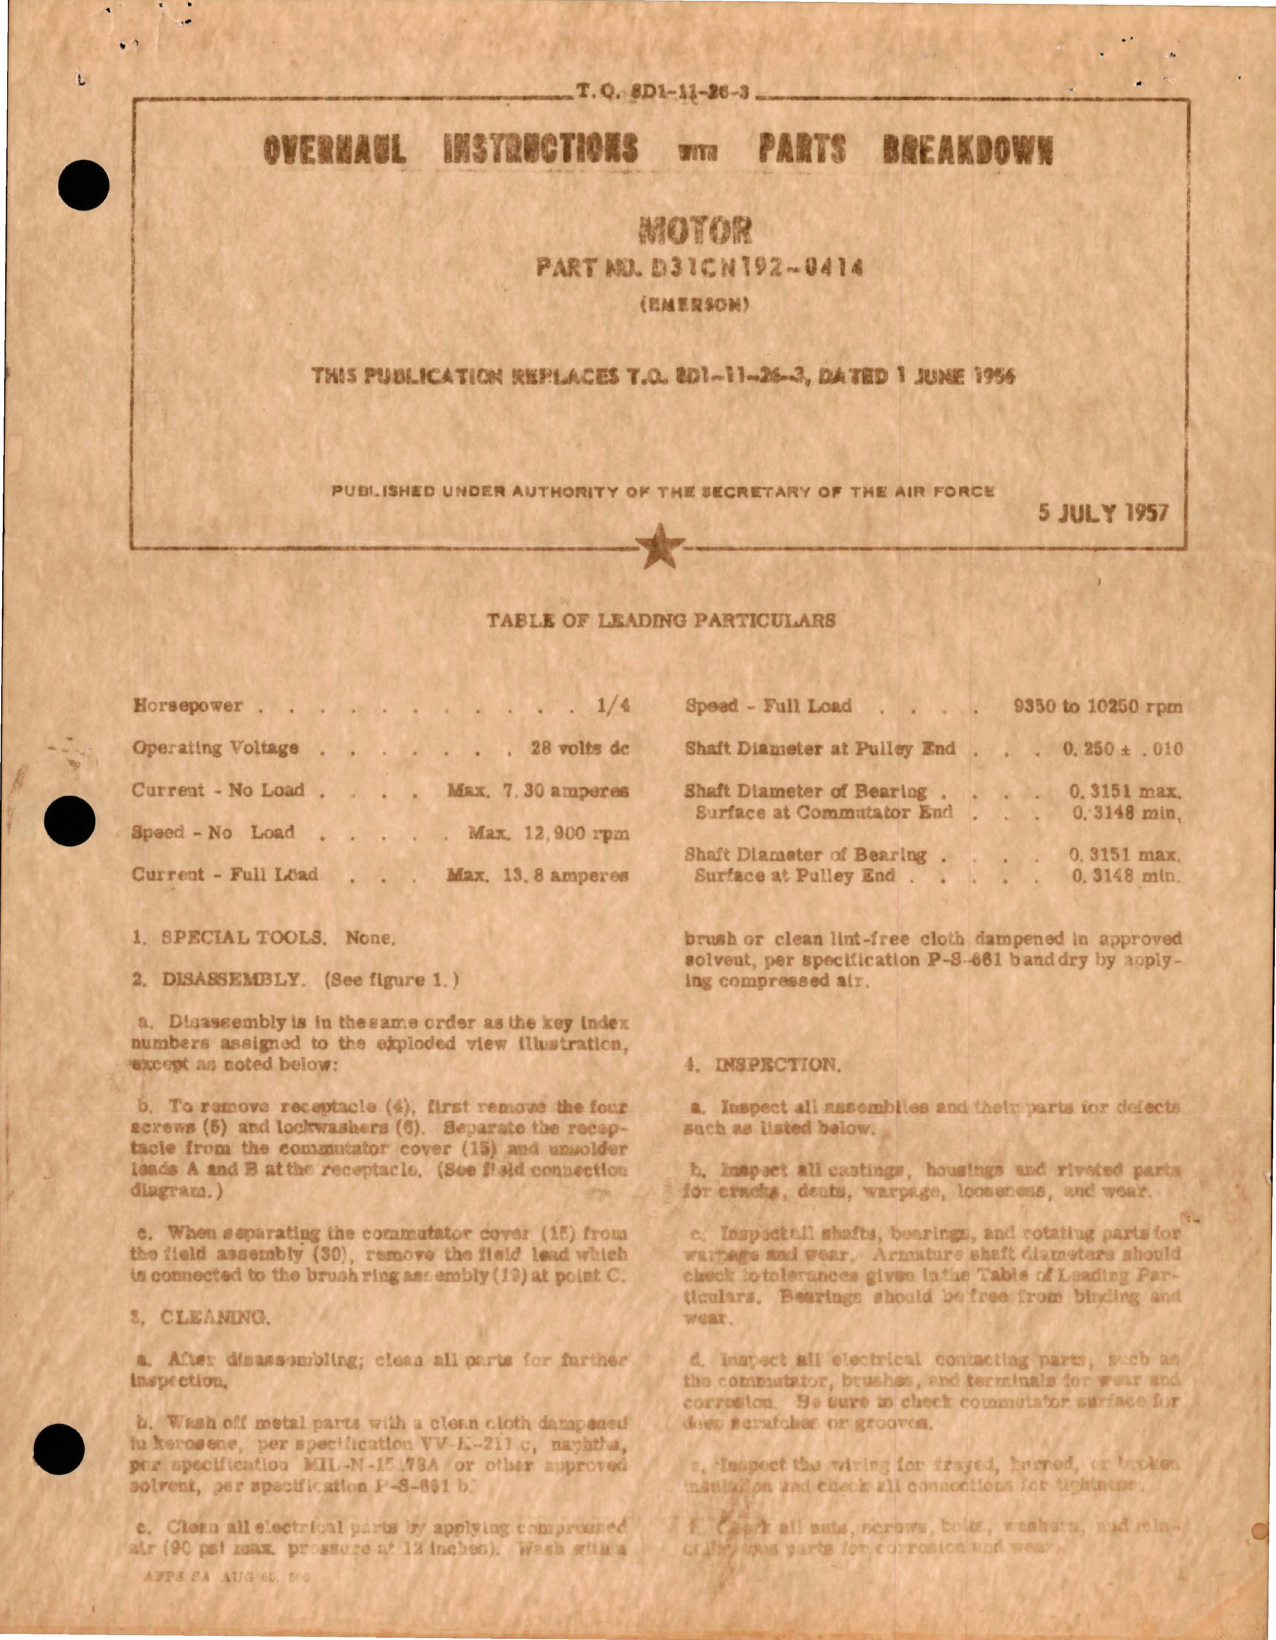 Sample page 1 from AirCorps Library document: Overhaul Instructions with Parts Breakdown for Motor - Part D31CN192-0414